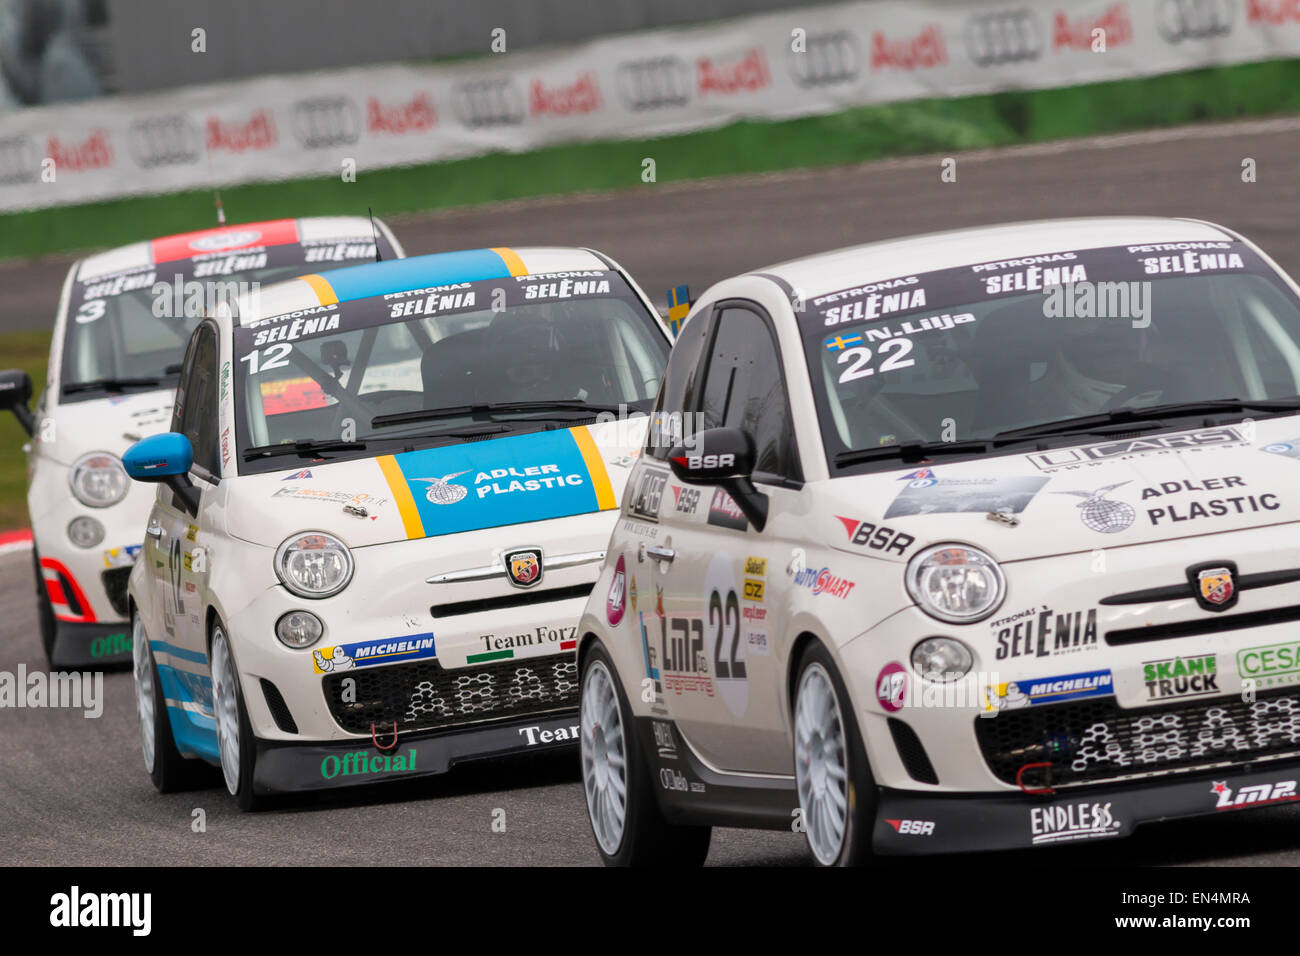 Monza, Italy - October 25, 2014: Fiat Abarth 695 of  Forza Servic Team, driven by Anselmi Luca Stock Photo